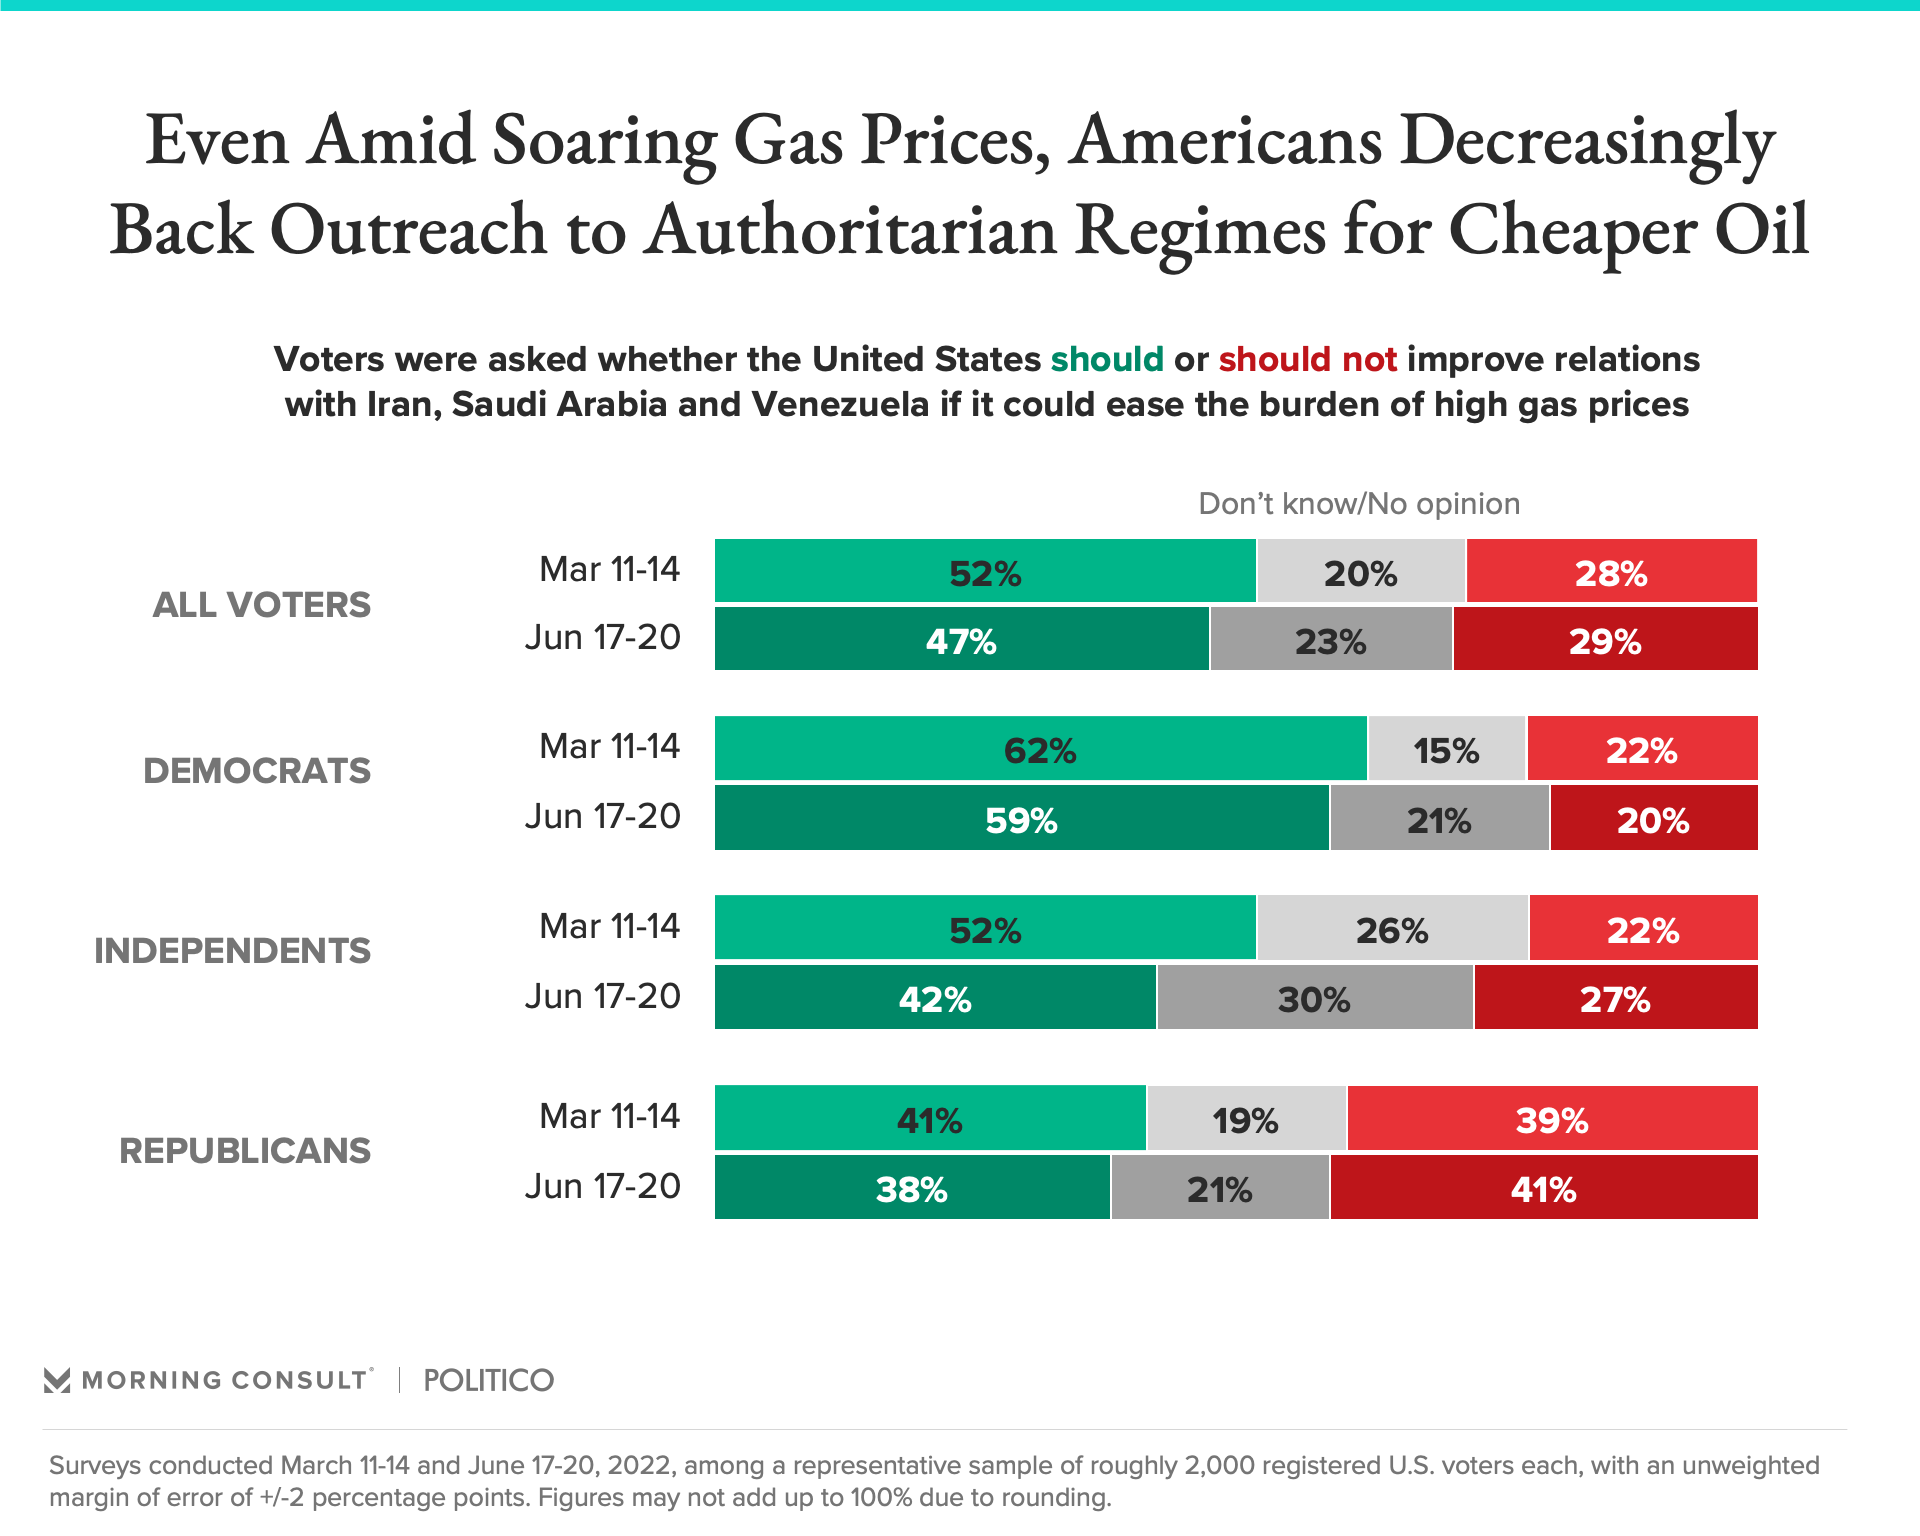 Chart conveying American support for outreach to authoritarian regimes in order to get cheaper oil and gas prices